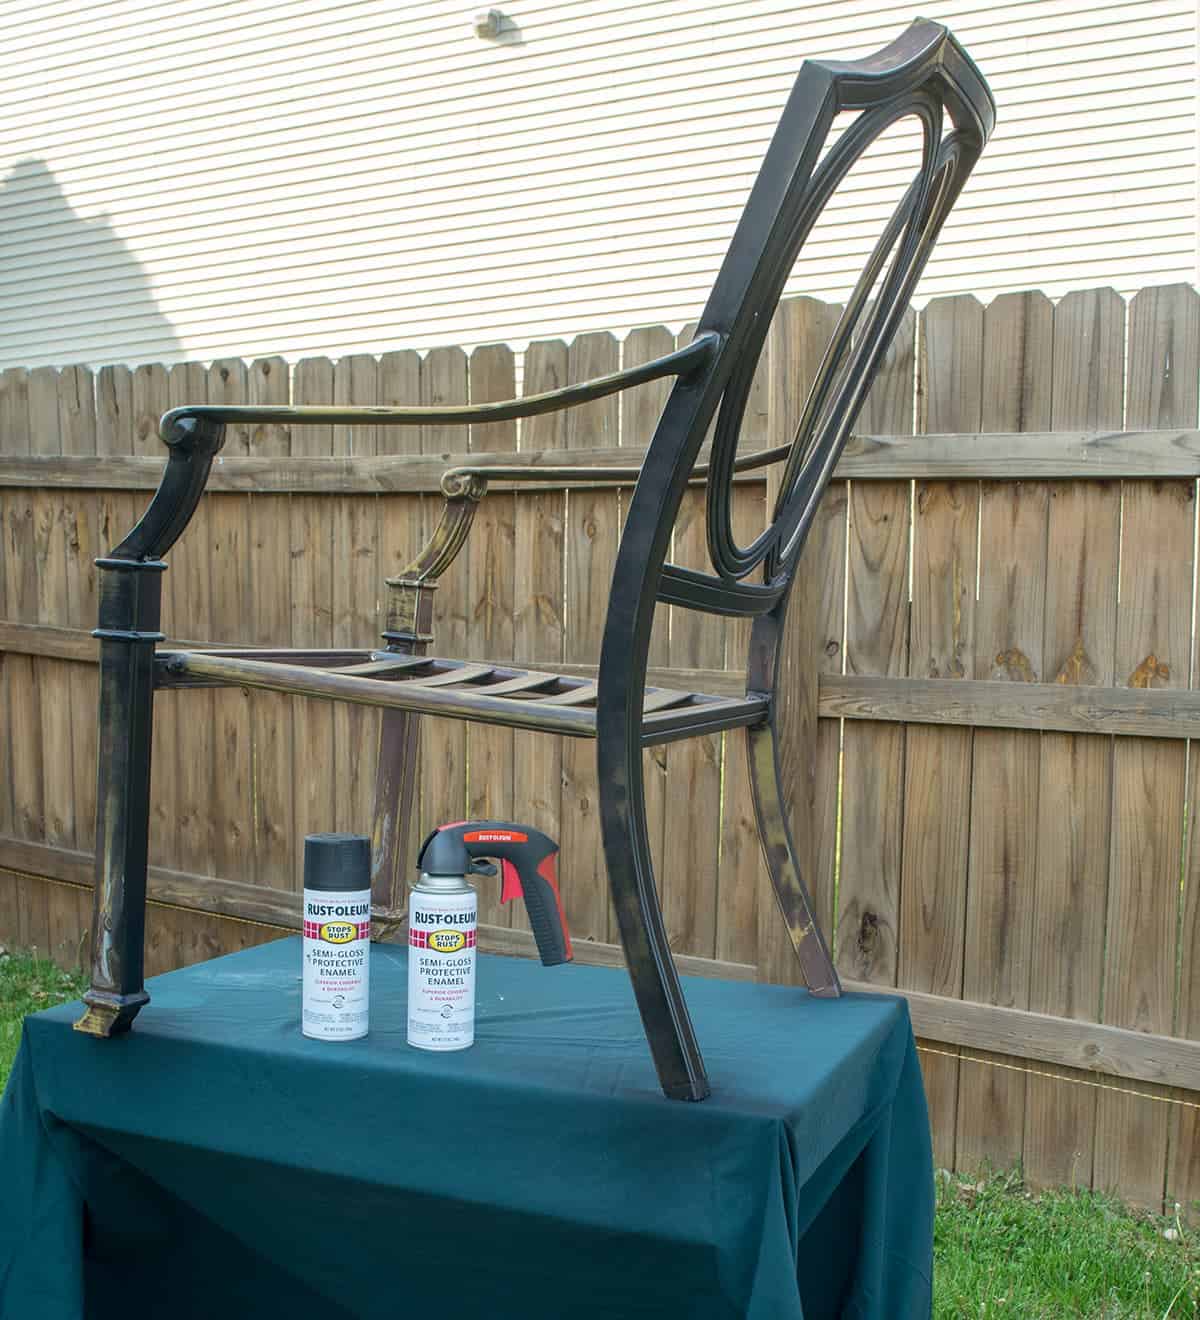 How To Spray Paint Outdoor Furniture, How To Spray Paint Rusted Metal Furniture